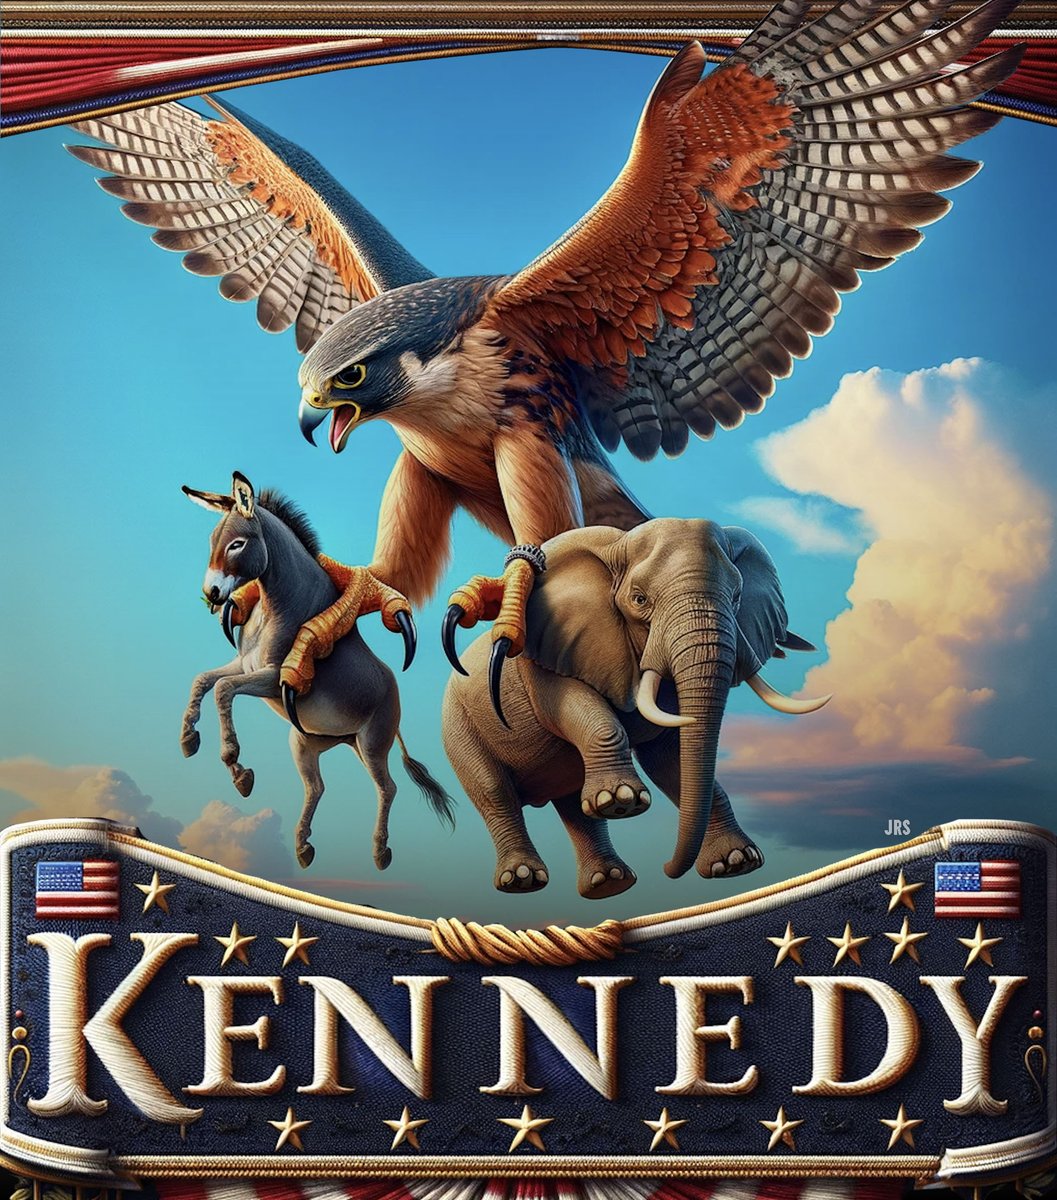 Kennedy will end the failed two party system and restore our government to serve We The People 🇺🇸
#KennedyShanahan24 #WeThePeople